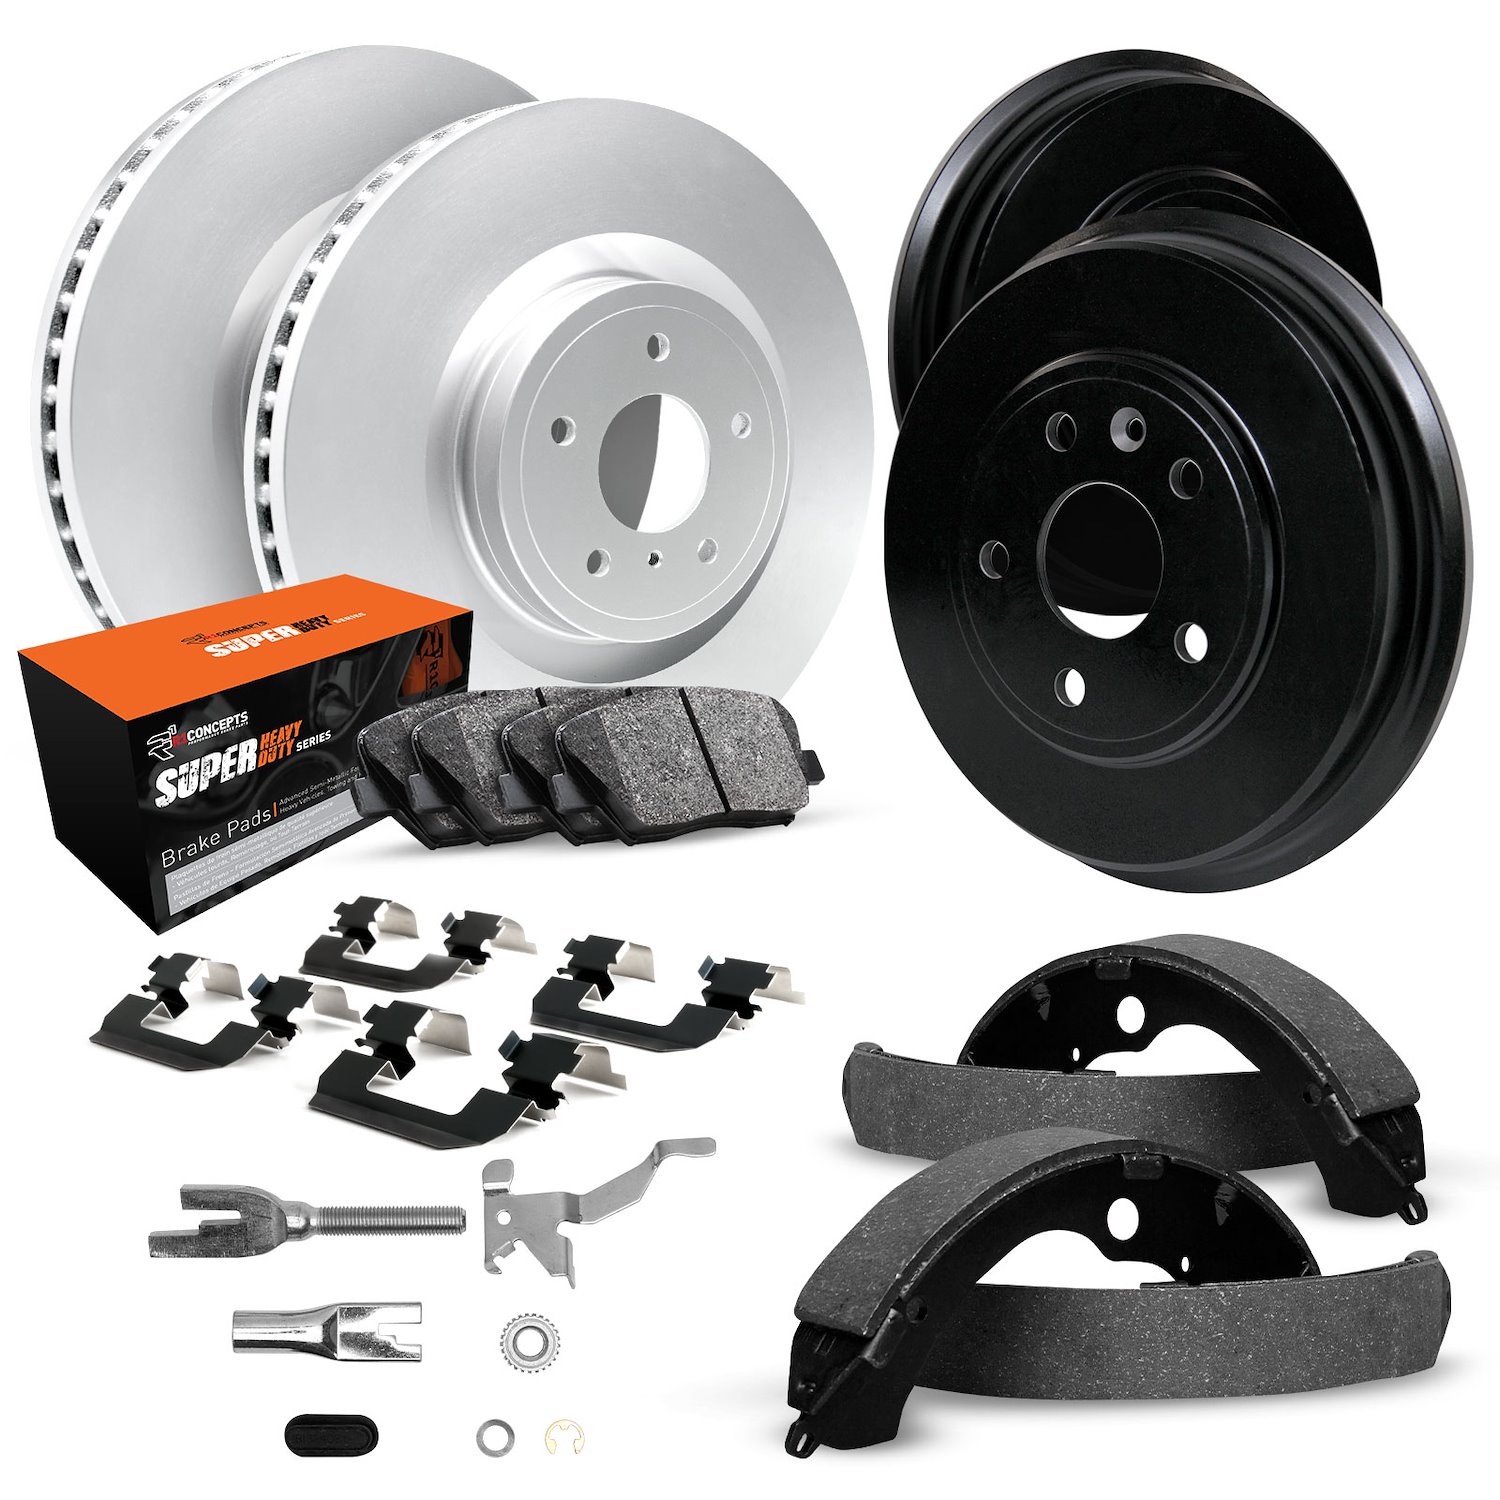 GEO-Carbon Brake Rotor & Drum Set w/Super-Duty Pads, Shoes, Hardware/Adjusters, 1983-1989 Ford/Lincoln/Mercury/Mazda